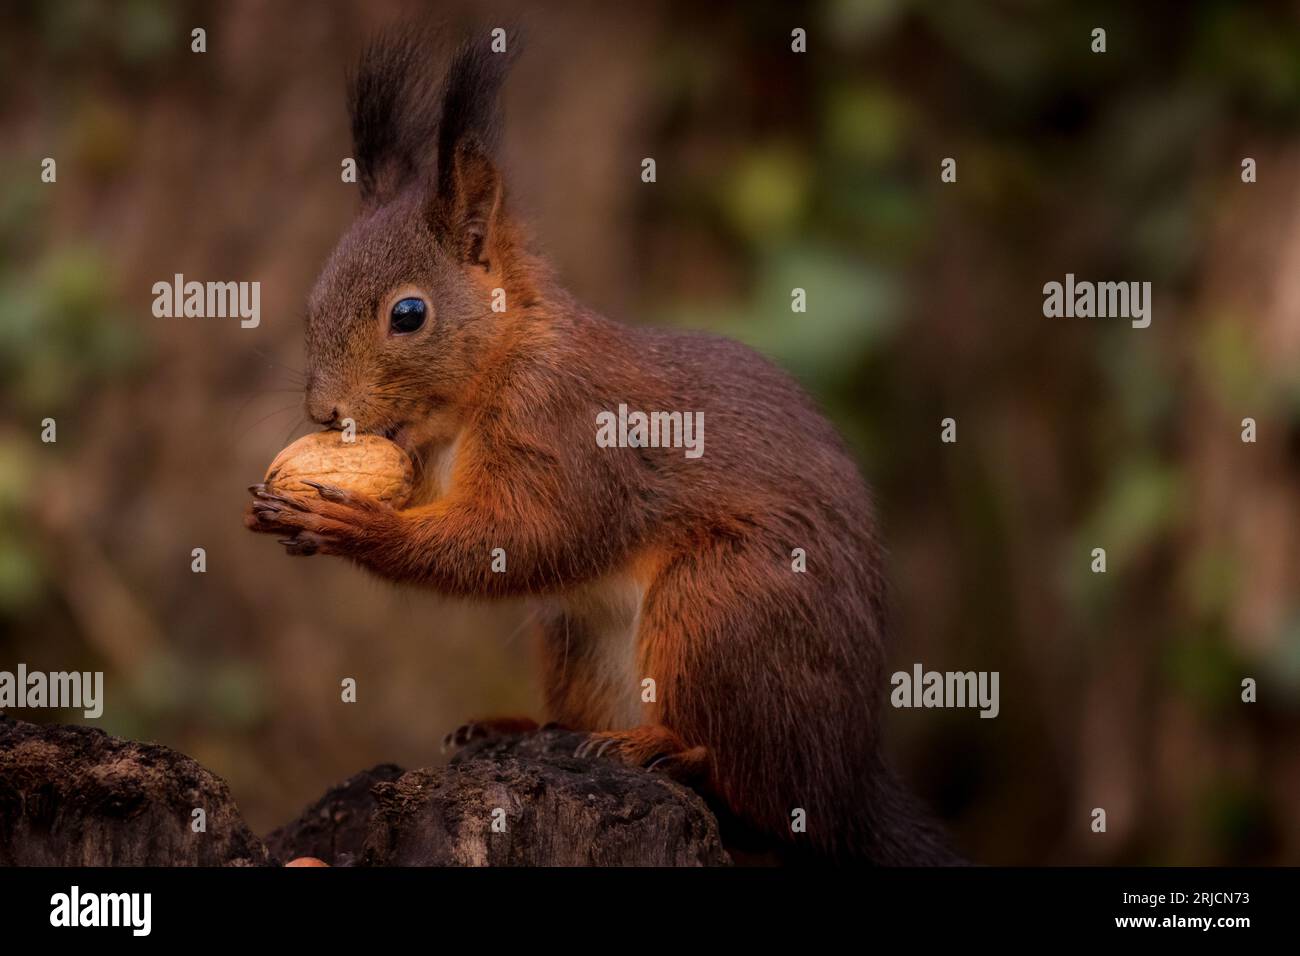 squirrel eating a nut Stock Photo